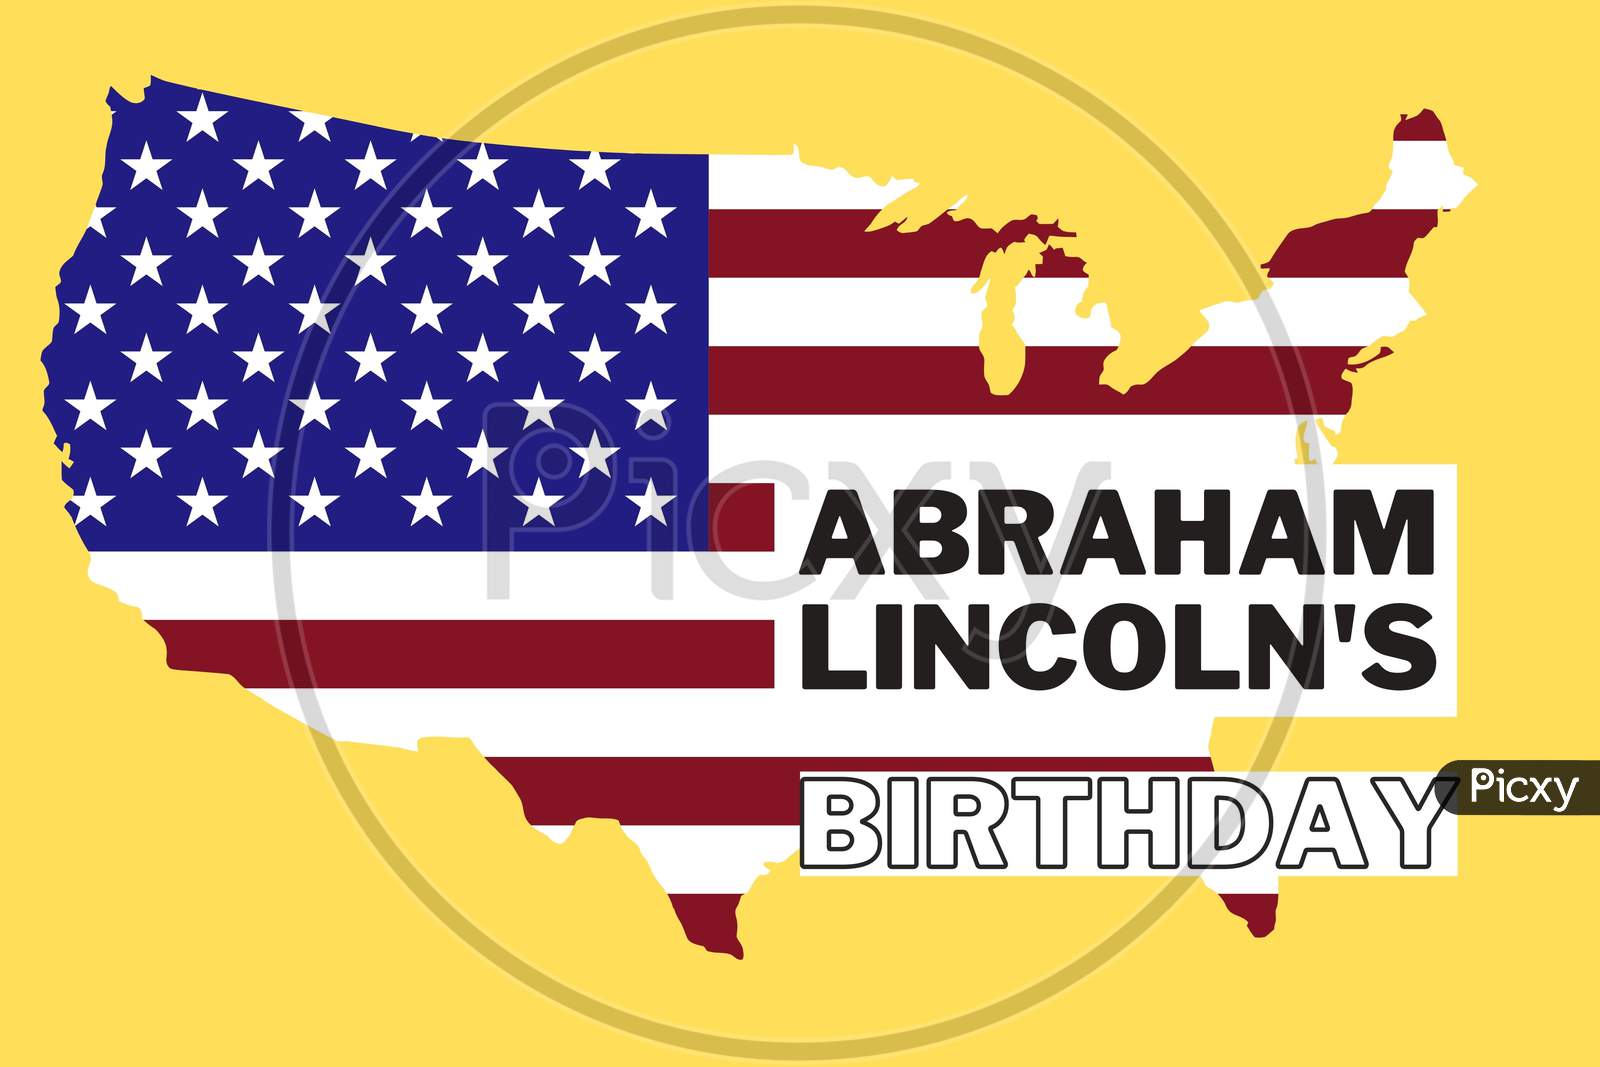 Abraham Lincoln’S Birthday. National Holiday In The United States. Poster, Banner And Background . Birthday Of One Of The Most Popular Presidents Of America.